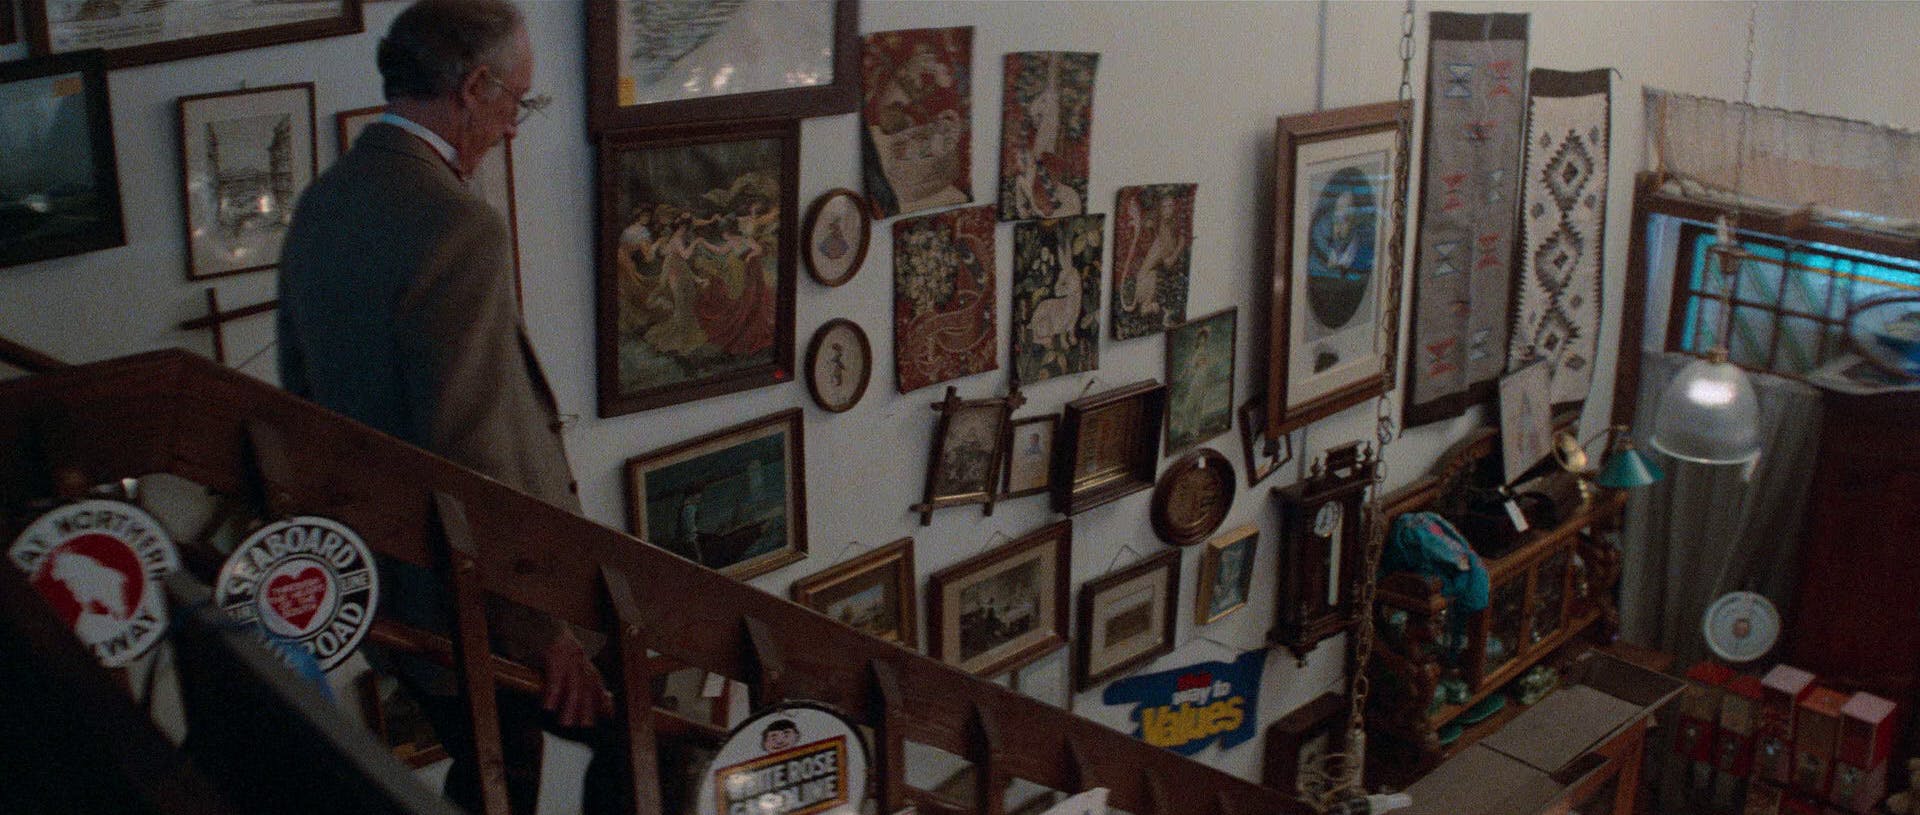 As the clerk descends the staircase at an antique shop in San Francisco, spotted on the wall is a portrait of William Shakespeare in Star Trek: The Voyage Home